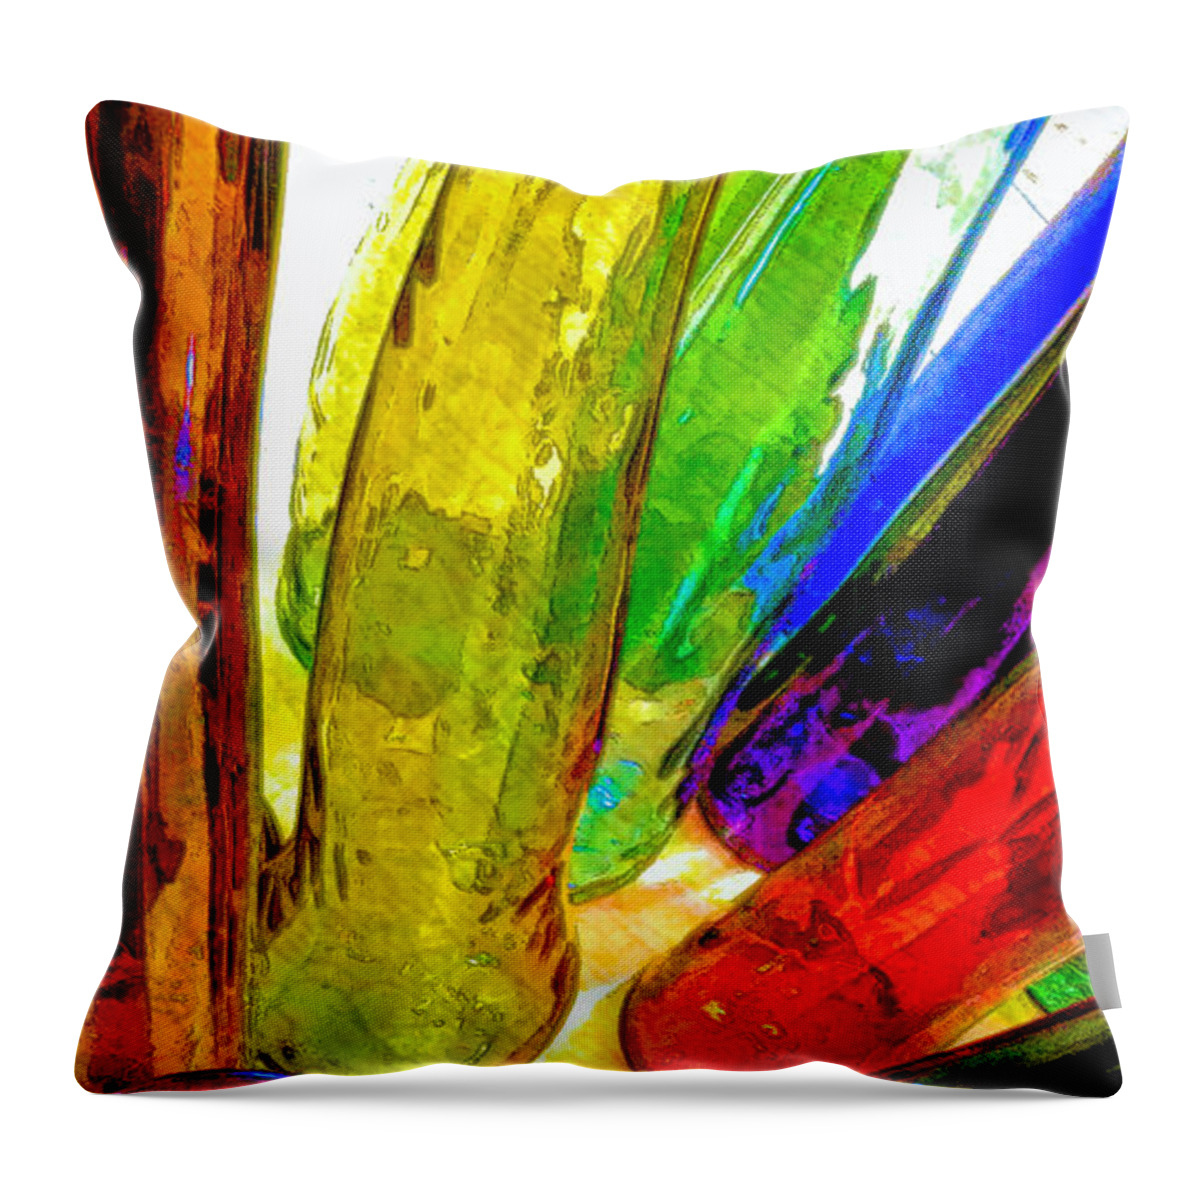 Bloom In Glass Throw Pillow featuring the photograph Bloom In Glass #2 by James Stoshak